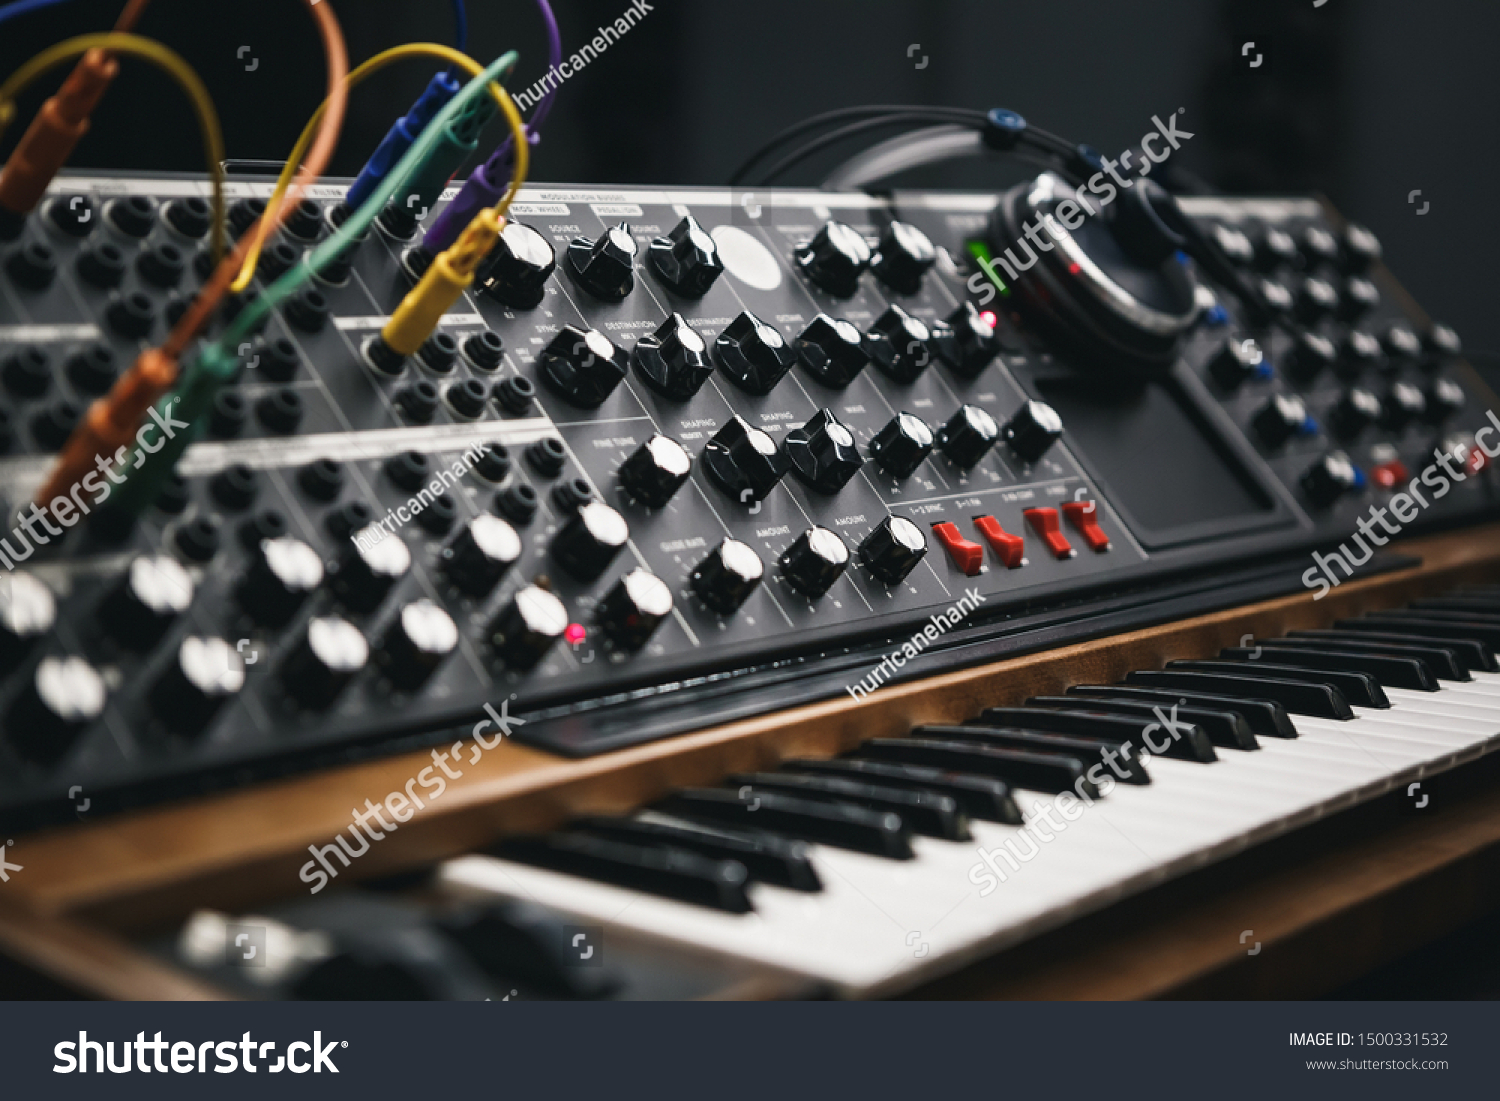 Analog synthesizer board in sound recording studio. Professional hi-fi audio equipment for music producer. Retro analog synth for producing new musical tracks in high quality #1500331532